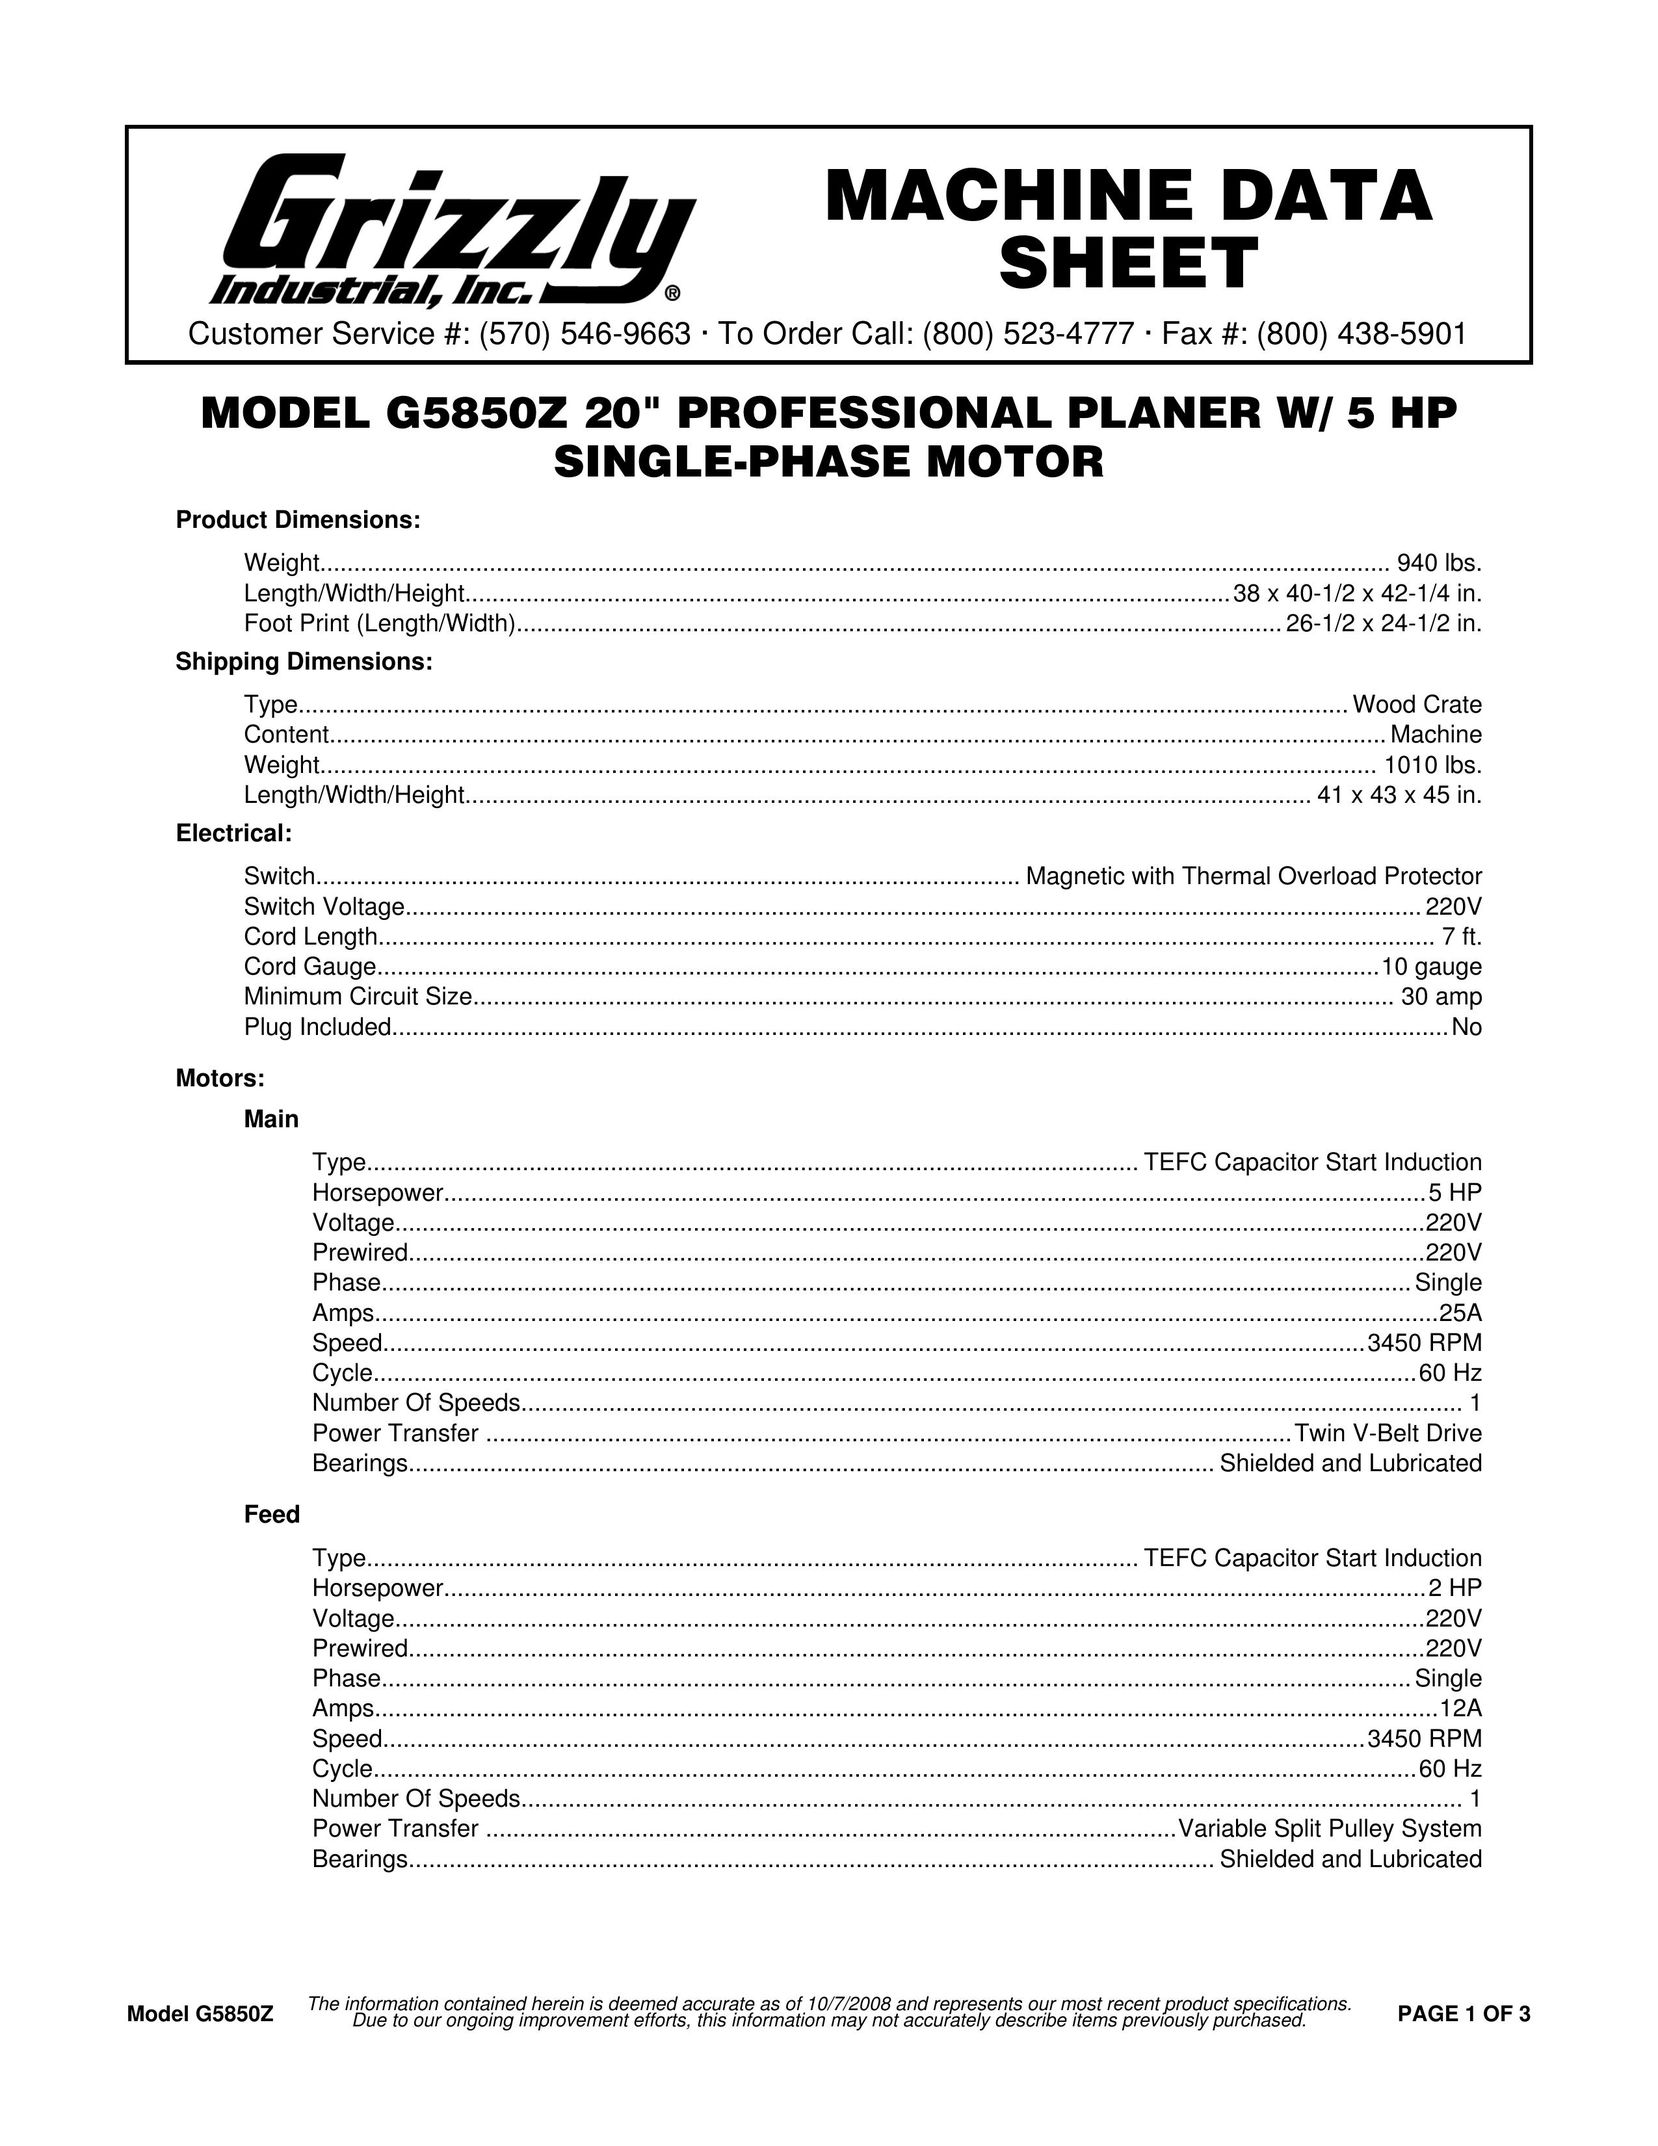 Grizzly G5850 Z Planer User Manual